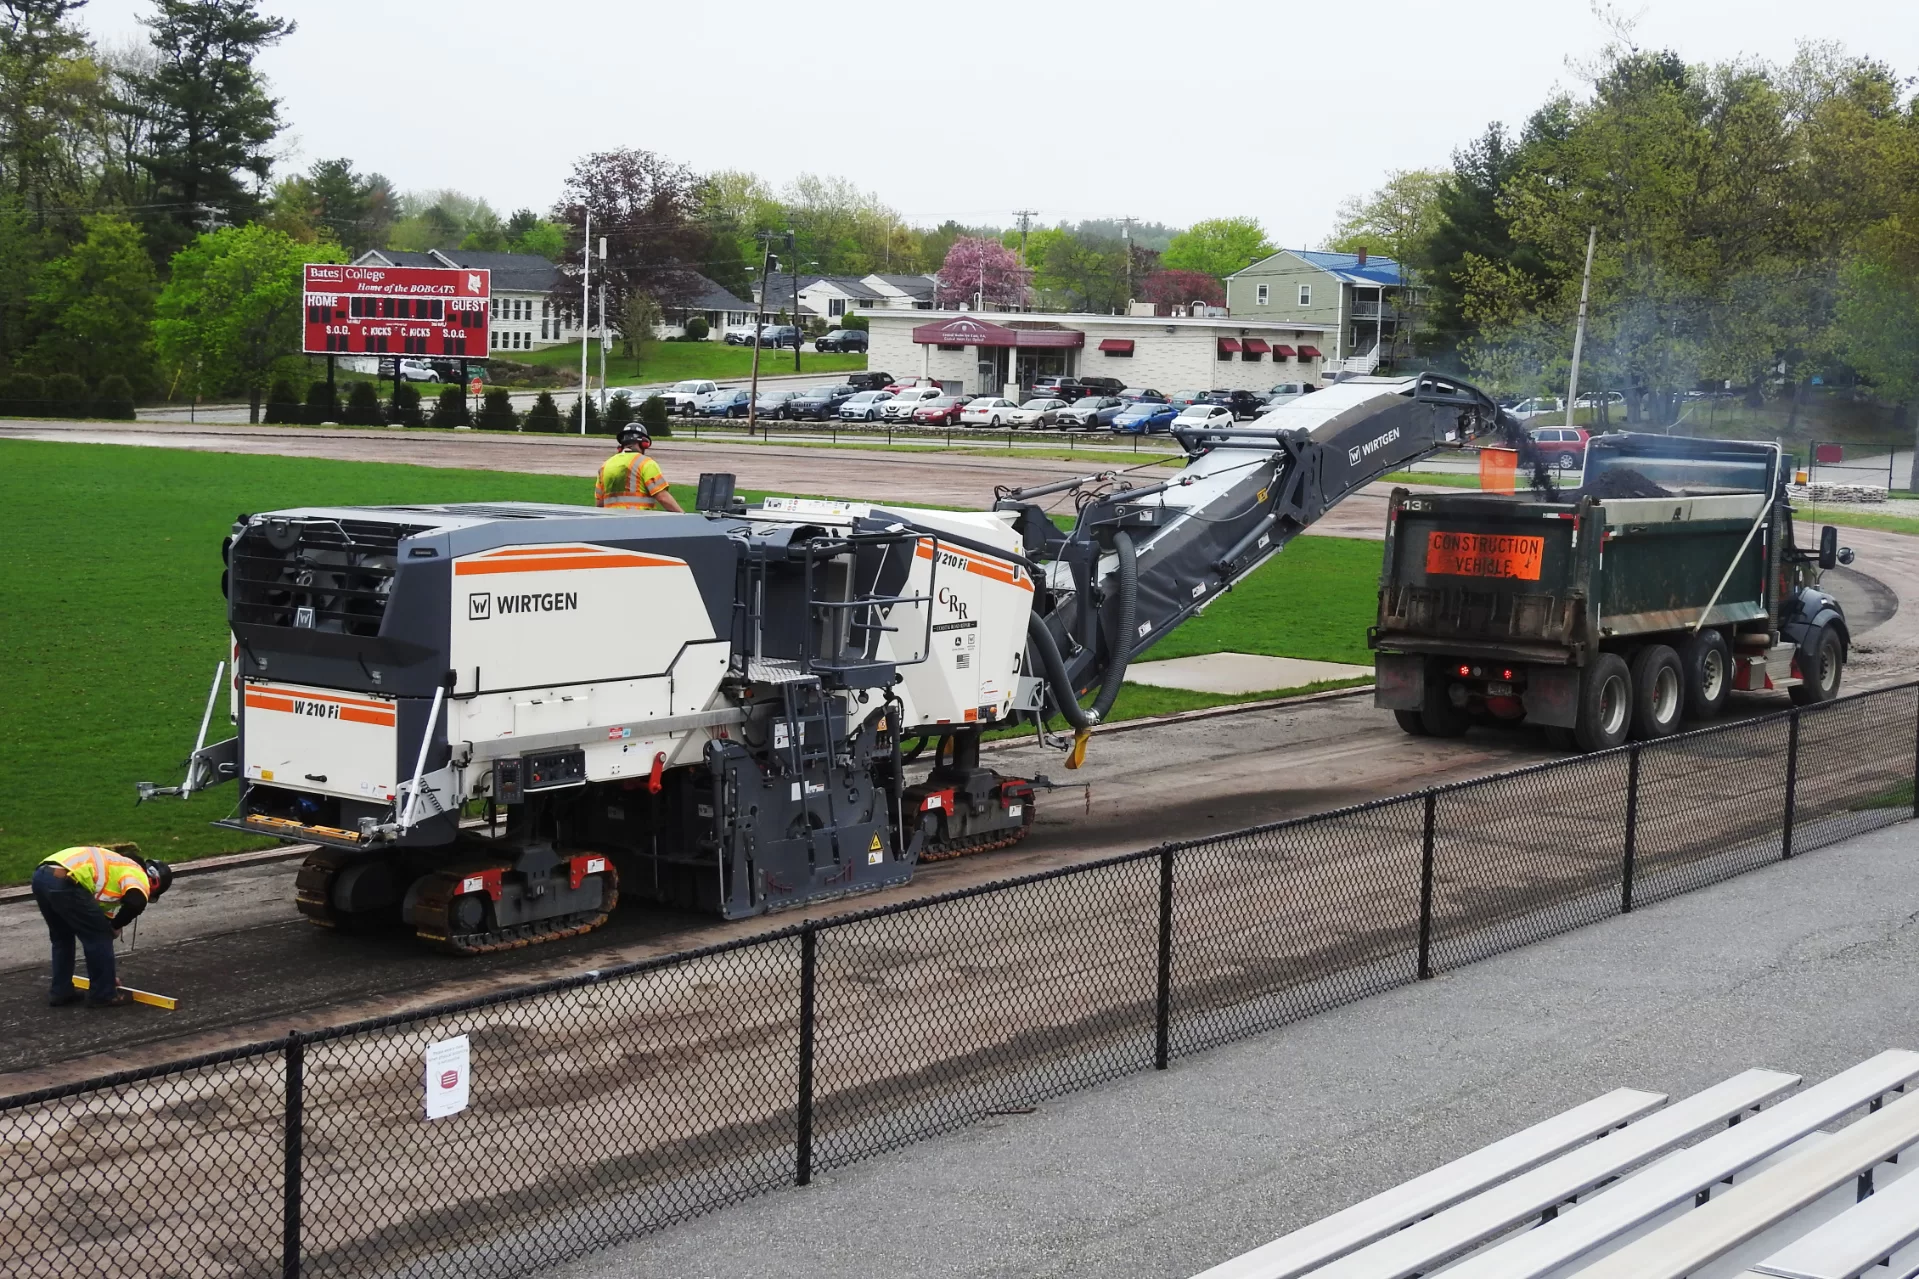 A milling machine removes the old 1.5-inch "wear layer" of asphalt, comprised of 9.5mm aggregate, at the Russell Street track at Bates College on May 16, 2022, in preparation for laying down a new layer of asphalt, upon which a new track surface, Mondo Super-X 720, will be applied. Coastal Road Repair handled the milling machine. (Jay Burns/Bates College)